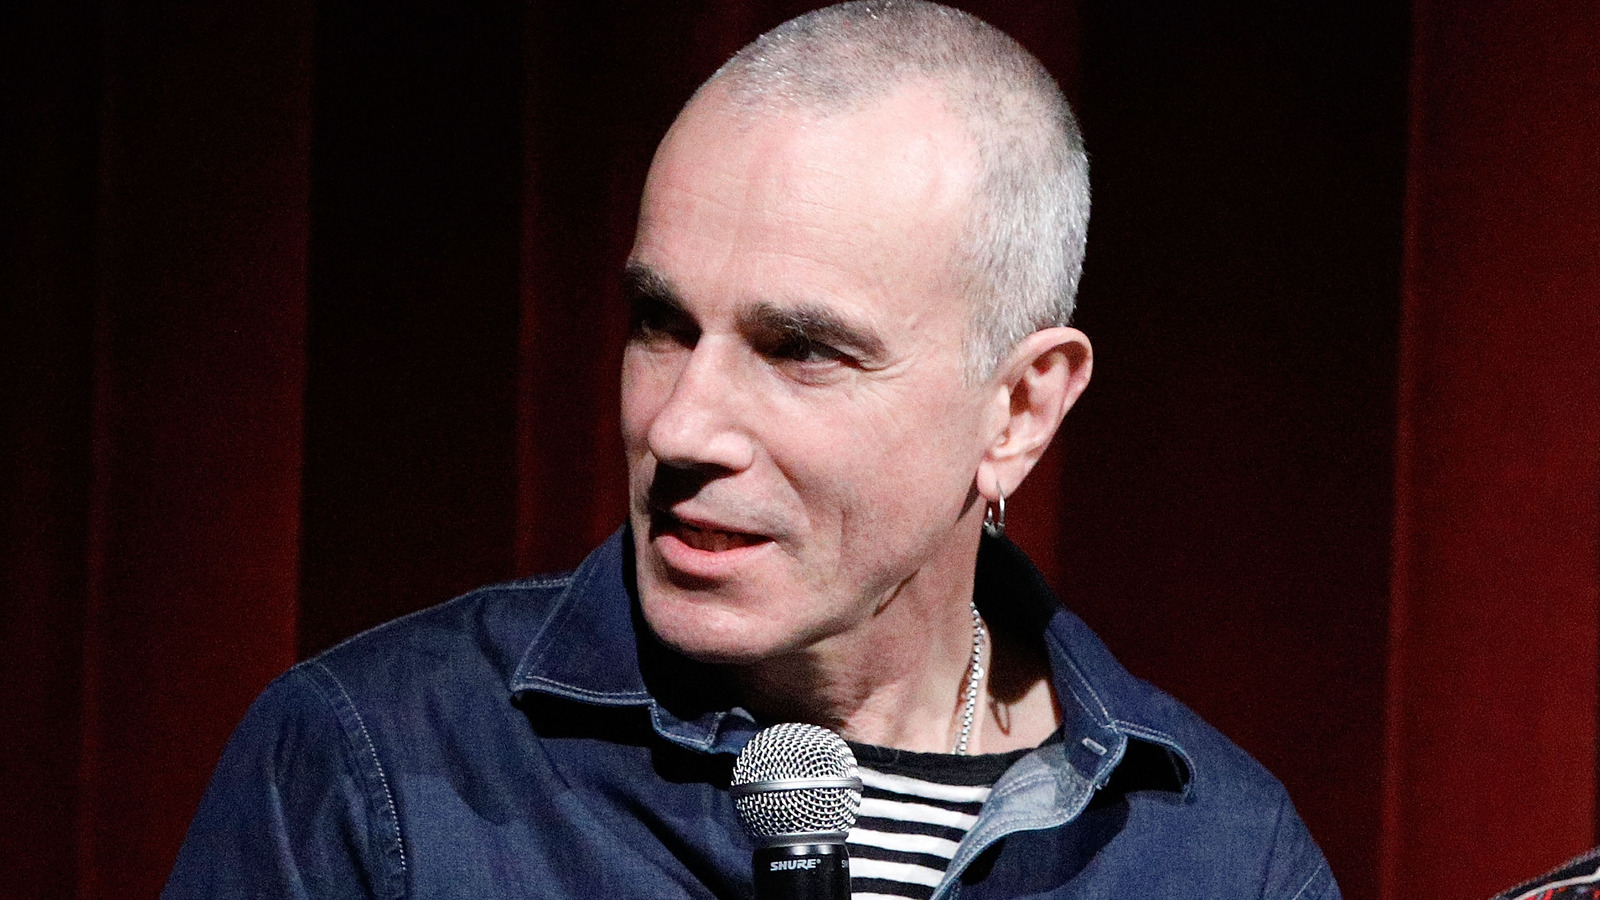 Daniel Day-Lewis: the rare photos of the actor around New York with white hair and crutches